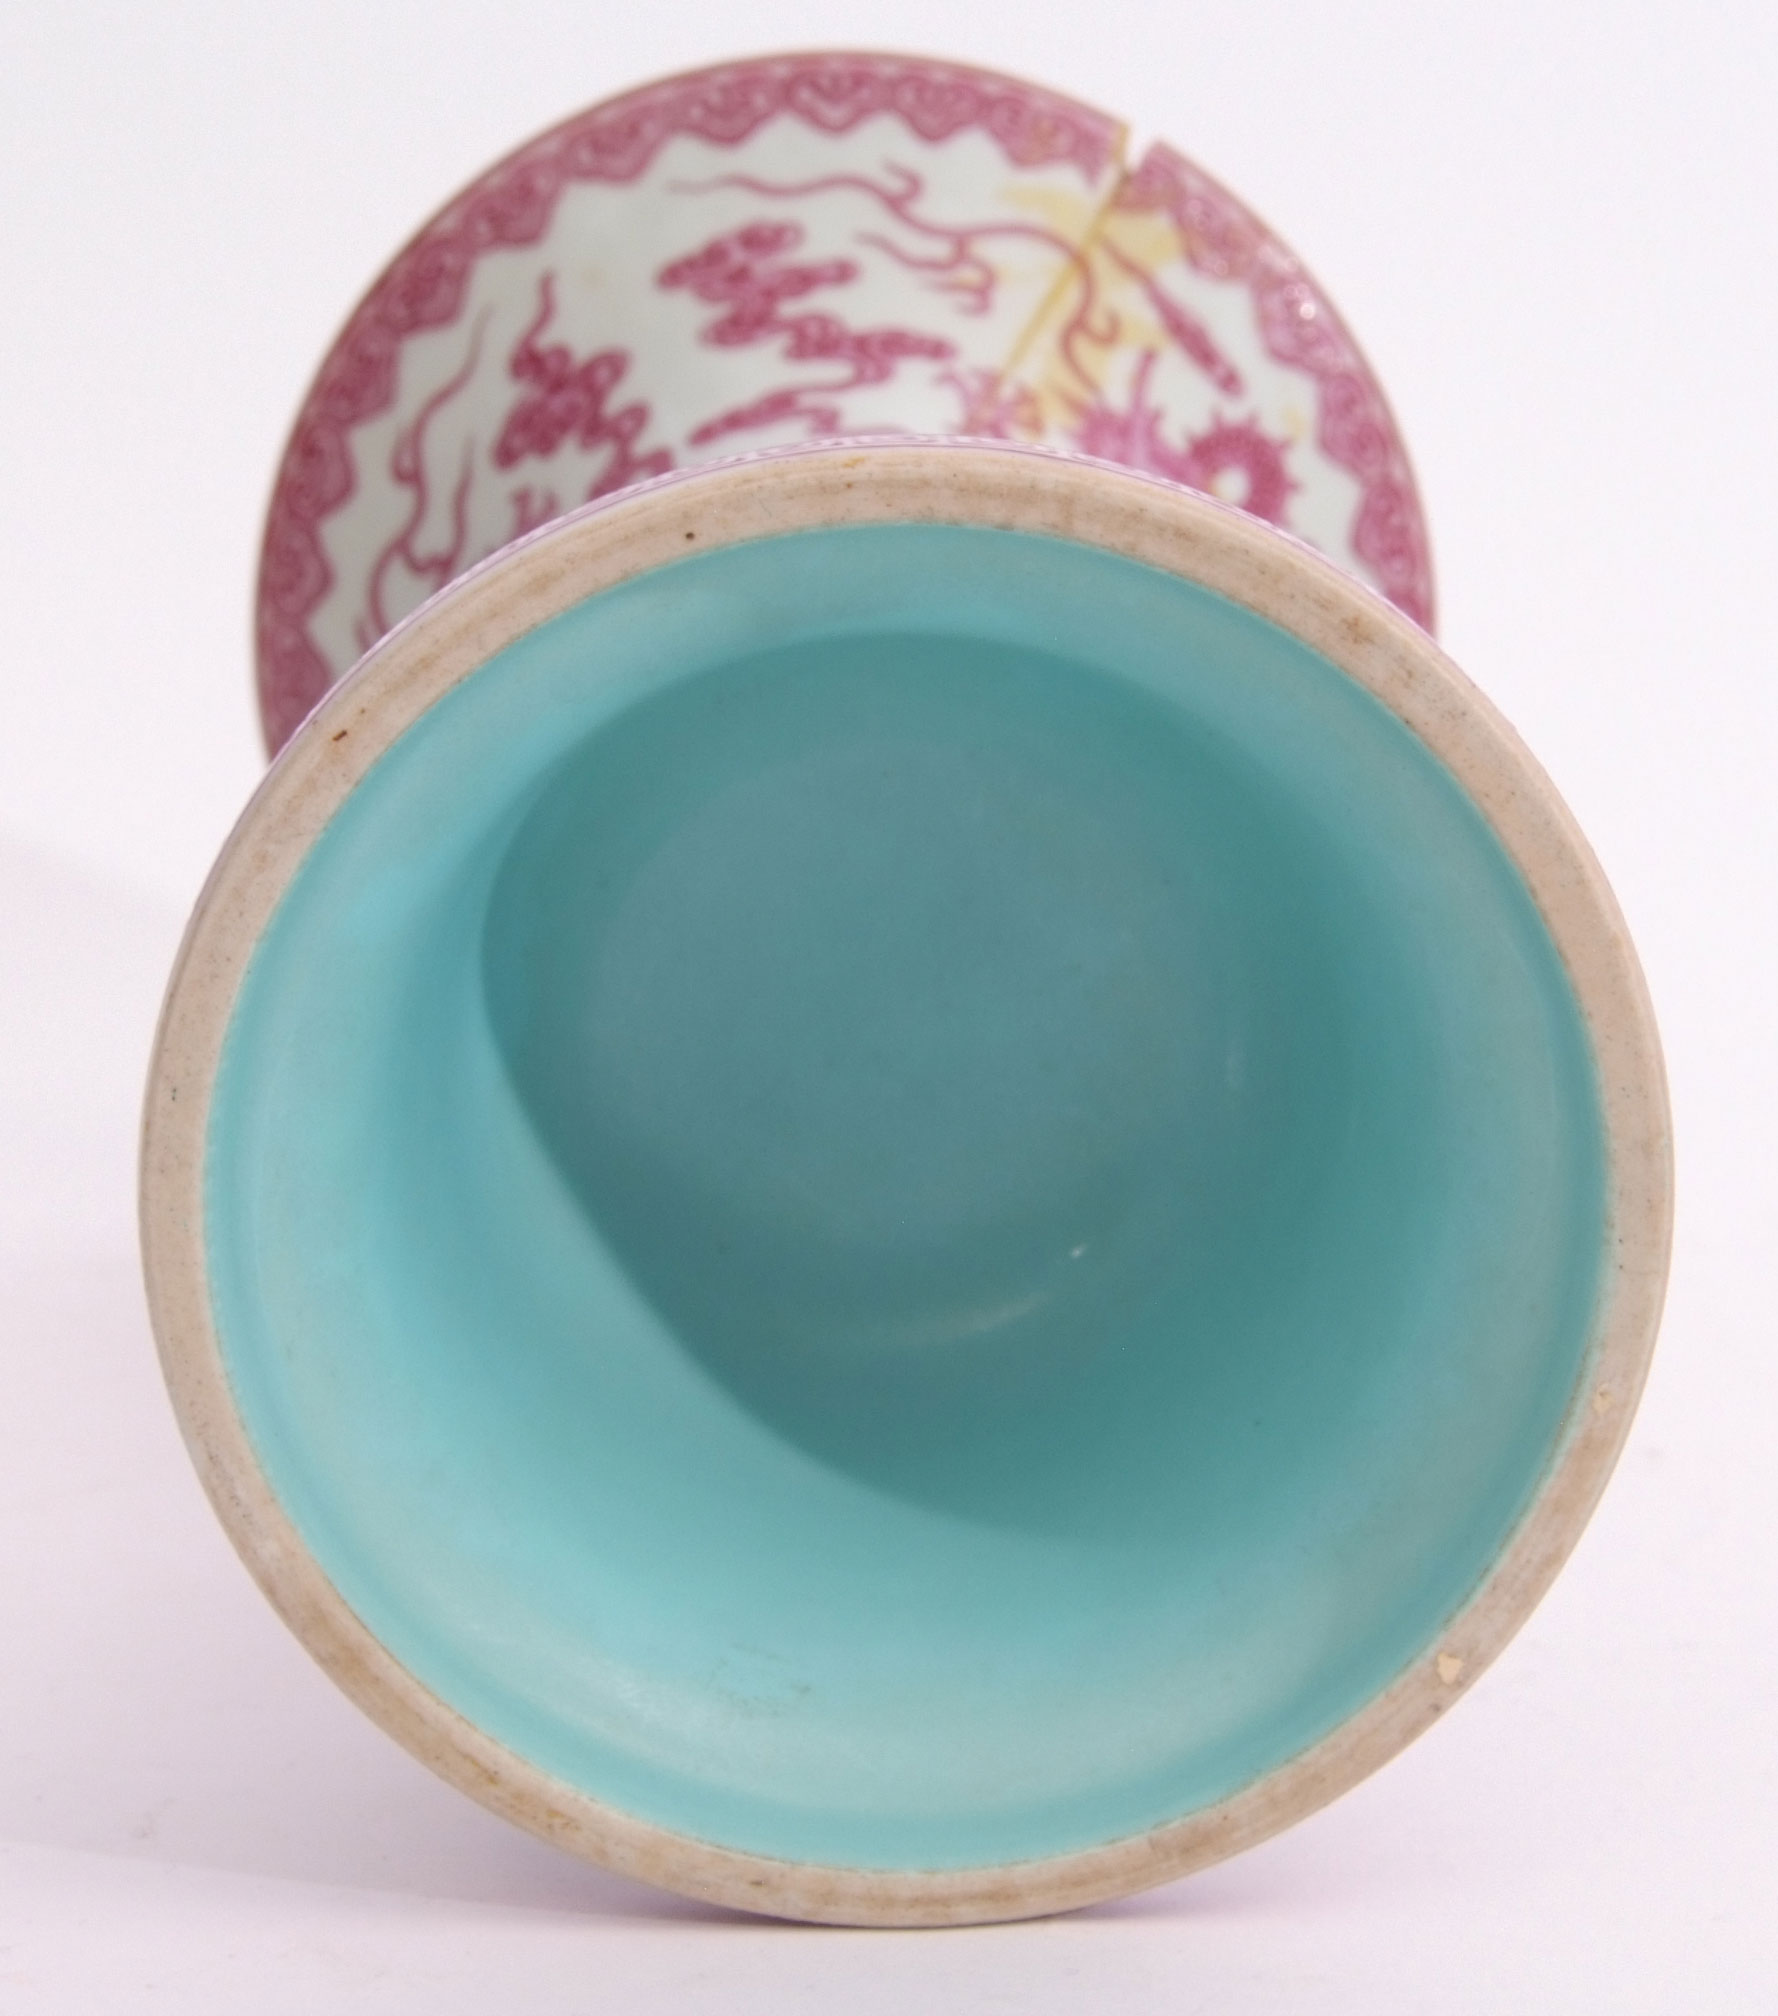 Chinese porcelain Gu shaped vase, decorated in pink enamel en camaieau with a two-horned five claw - Image 6 of 6